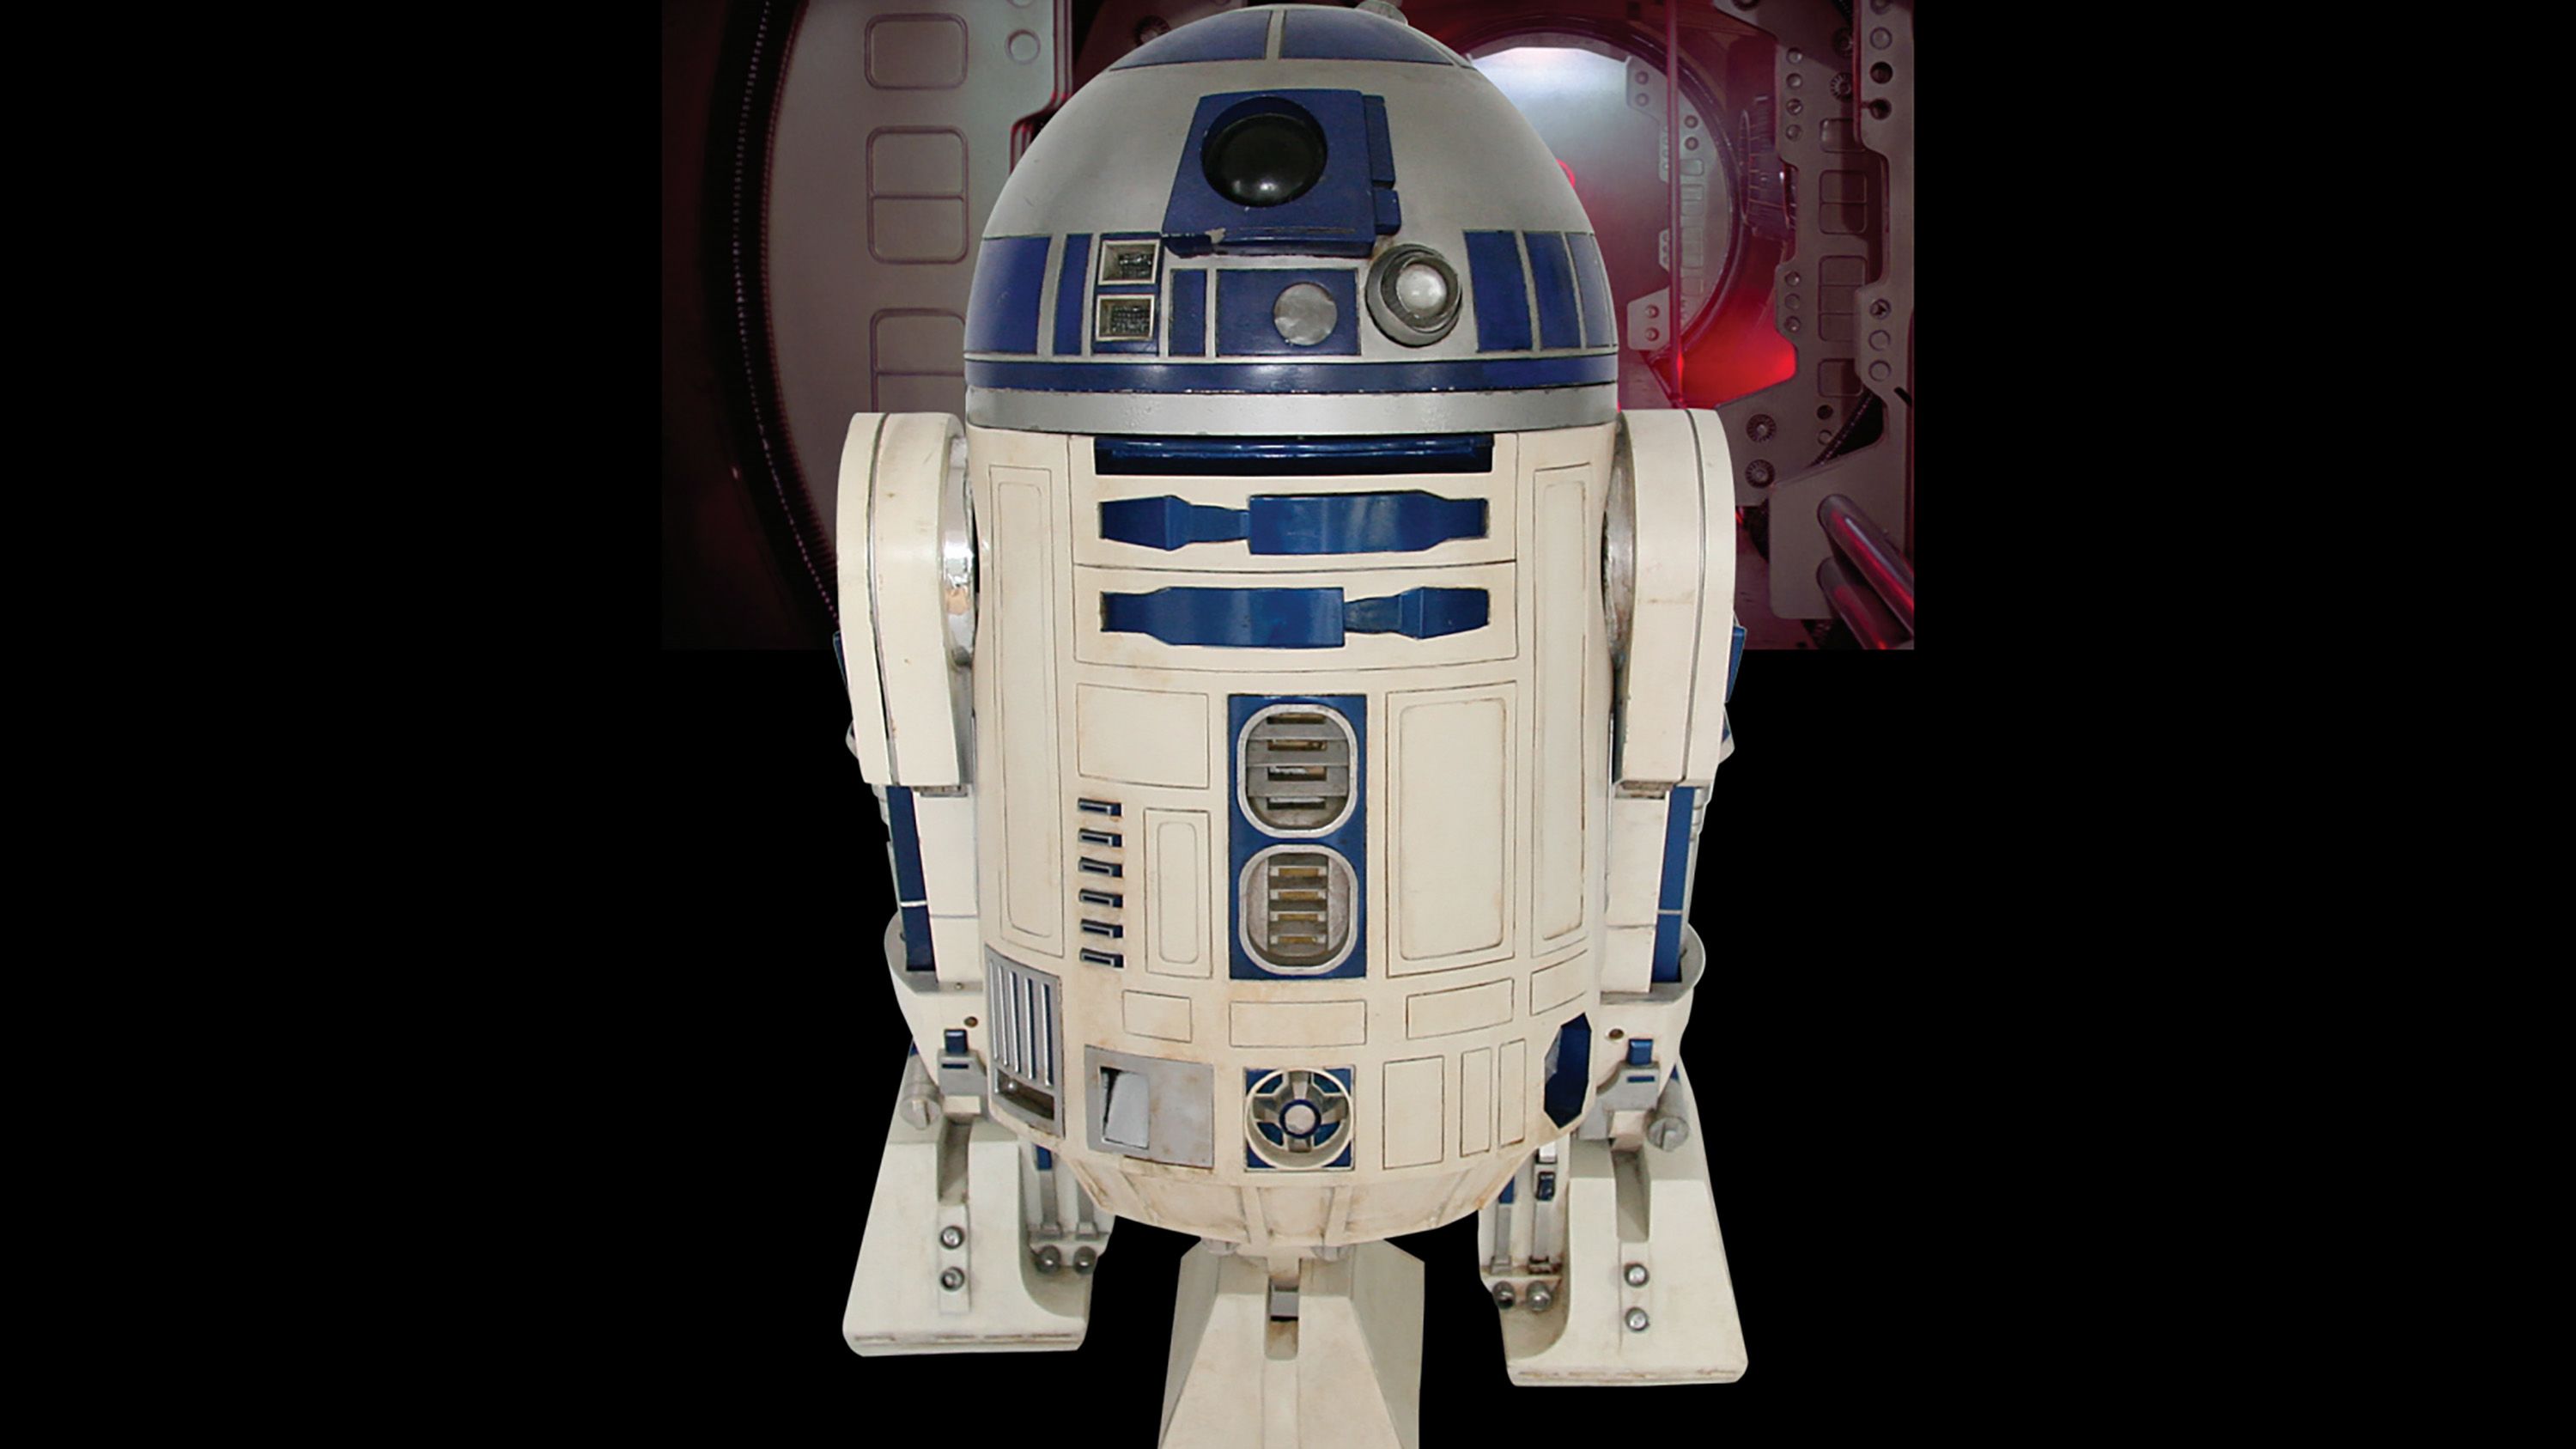 R2-D2 unit from 'Star Wars' sells for $2.75 million